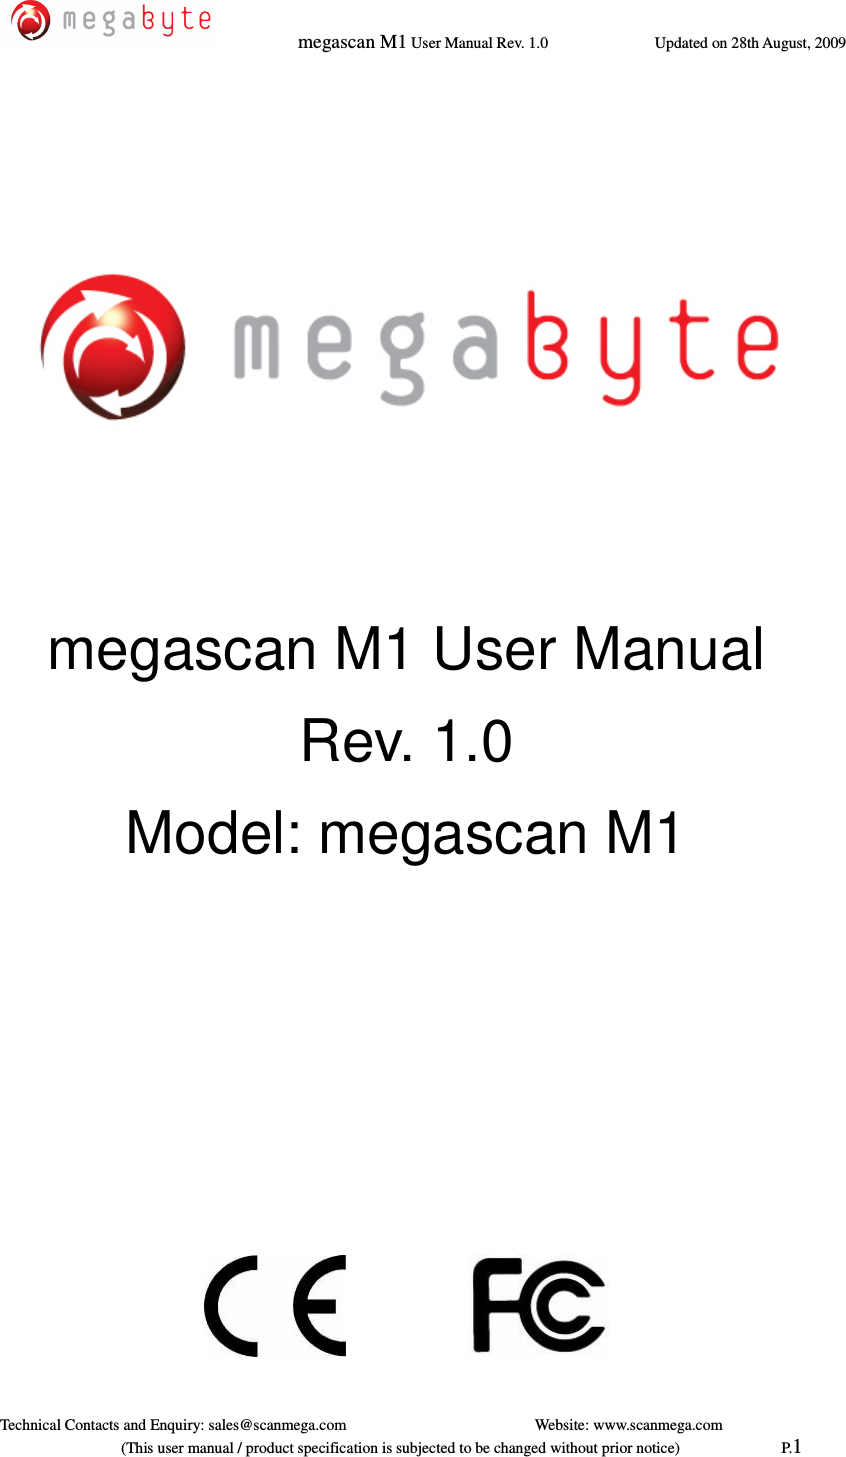   megascan M1 User Manual Rev. 1.0  Updated on 28th August, 2009     Technical Contacts and Enquiry: sales@scanmega.com          Website: www.scanmega.com                             (This user manual / product specification is subjected to be changed without prior notice)                          P.1           megascan M1 User Manual Rev. 1.0 Model: megascan M1                           